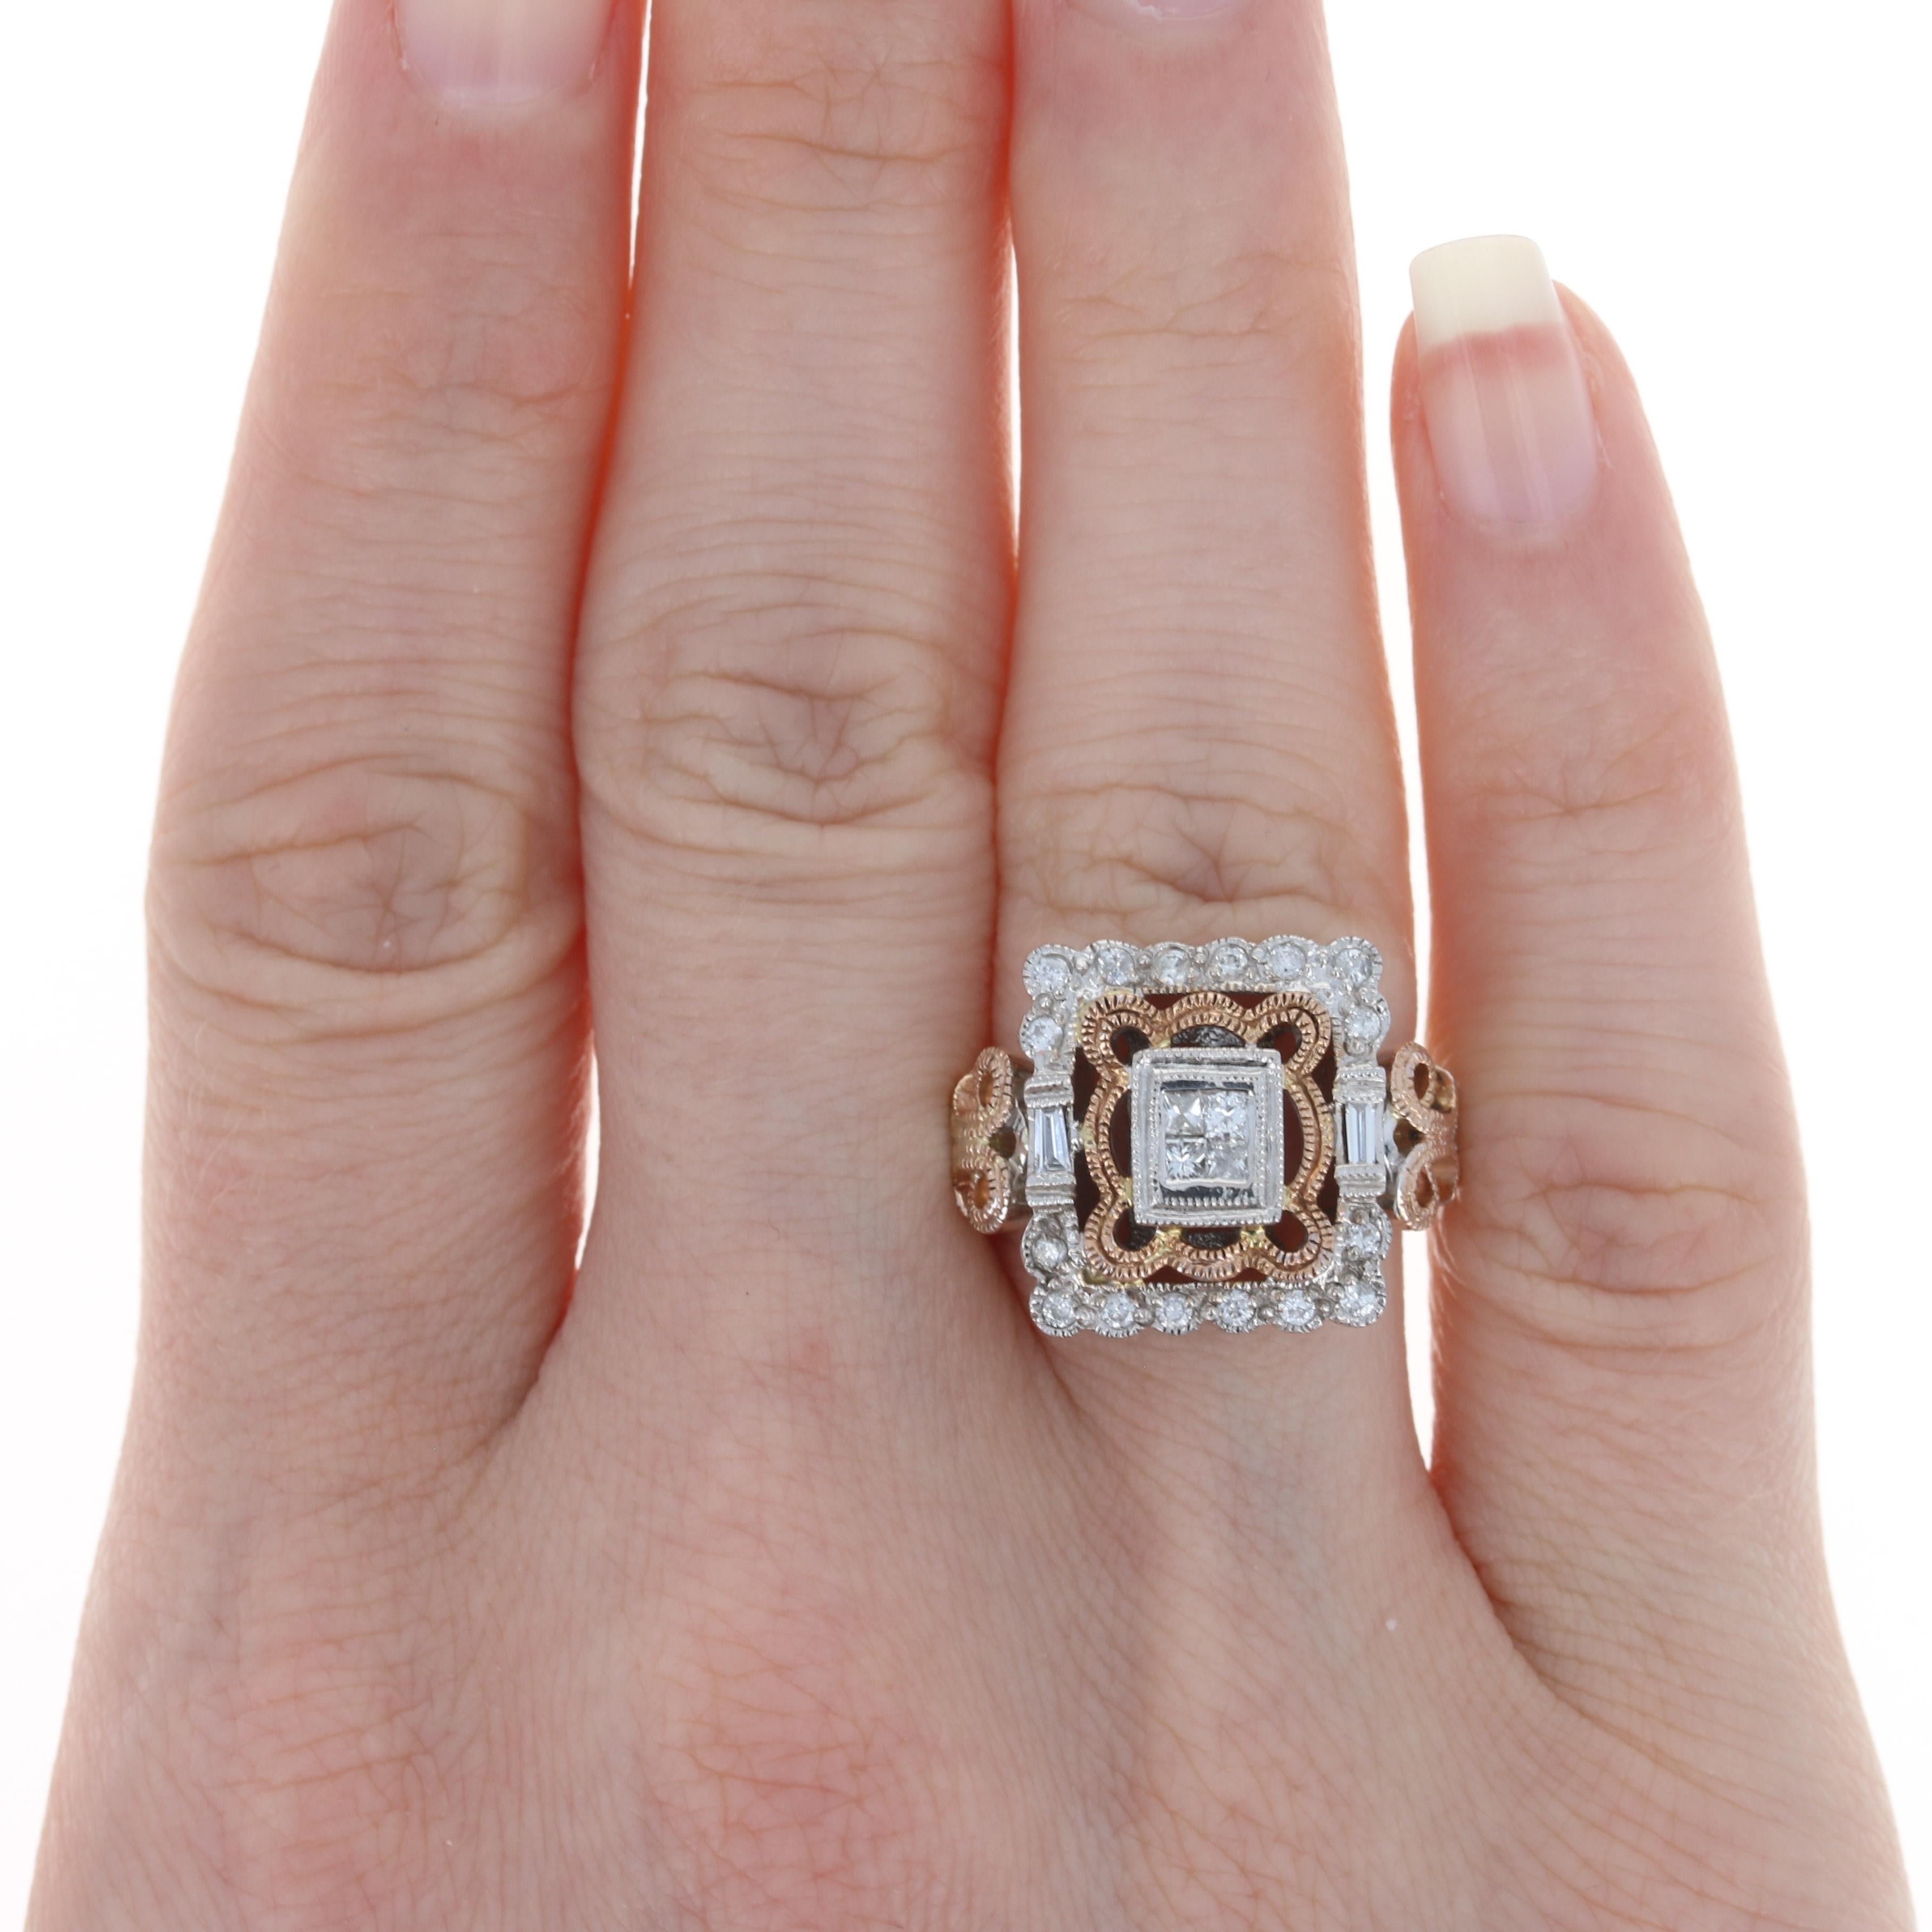 Size: 5
Sizing Fee: Up 2 sizes for $50

Metal Content: 14k White Gold & 14k Rose Gold

Stone Information: 
Natural Diamonds  
Total Carats: .50ctw
Cuts: Princess, Baguette, & Round Brilliant 
Color: G - H     
Clarity: SI2 - I1
 
Style: Cluster